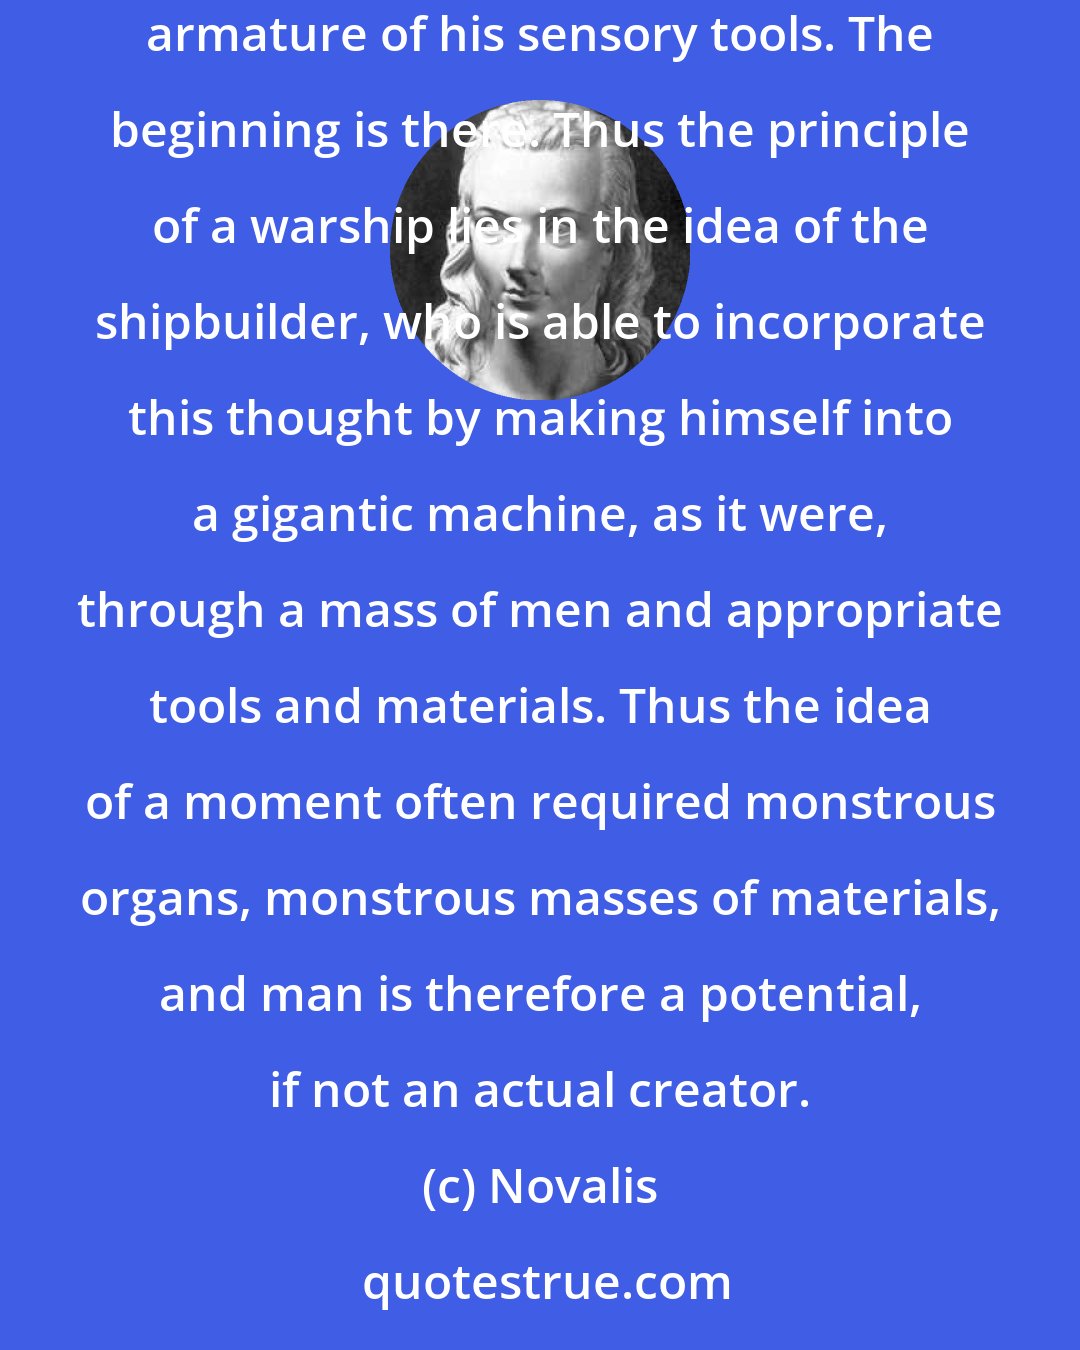 Novalis: Tools arm the man. One can well say that man is capable of bringing forth a world; he lacks only the necessary apparatus, the corresponding armature of his sensory tools. The beginning is there. Thus the principle of a warship lies in the idea of the shipbuilder, who is able to incorporate this thought by making himself into a gigantic machine, as it were, through a mass of men and appropriate tools and materials. Thus the idea of a moment often required monstrous organs, monstrous masses of materials, and man is therefore a potential, if not an actual creator.